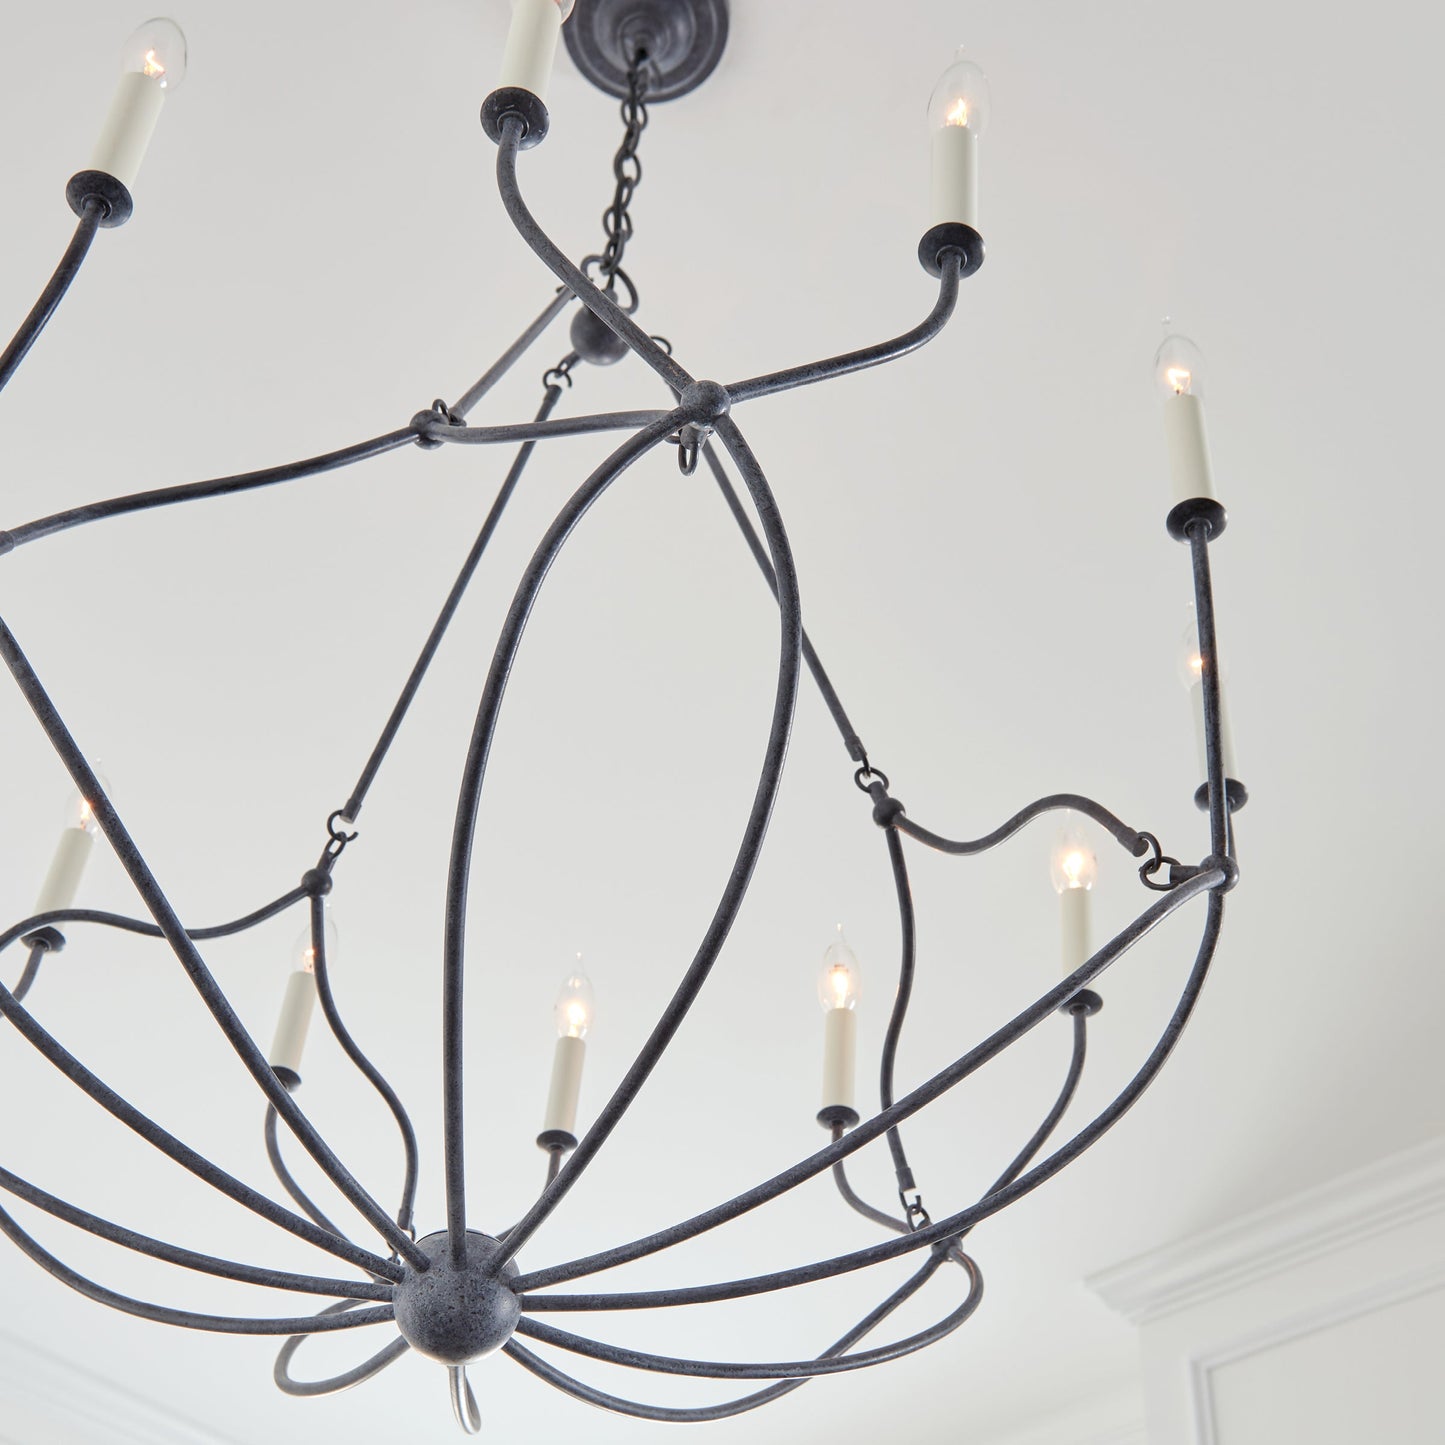 Chapman and Myers Richmond Chandelier